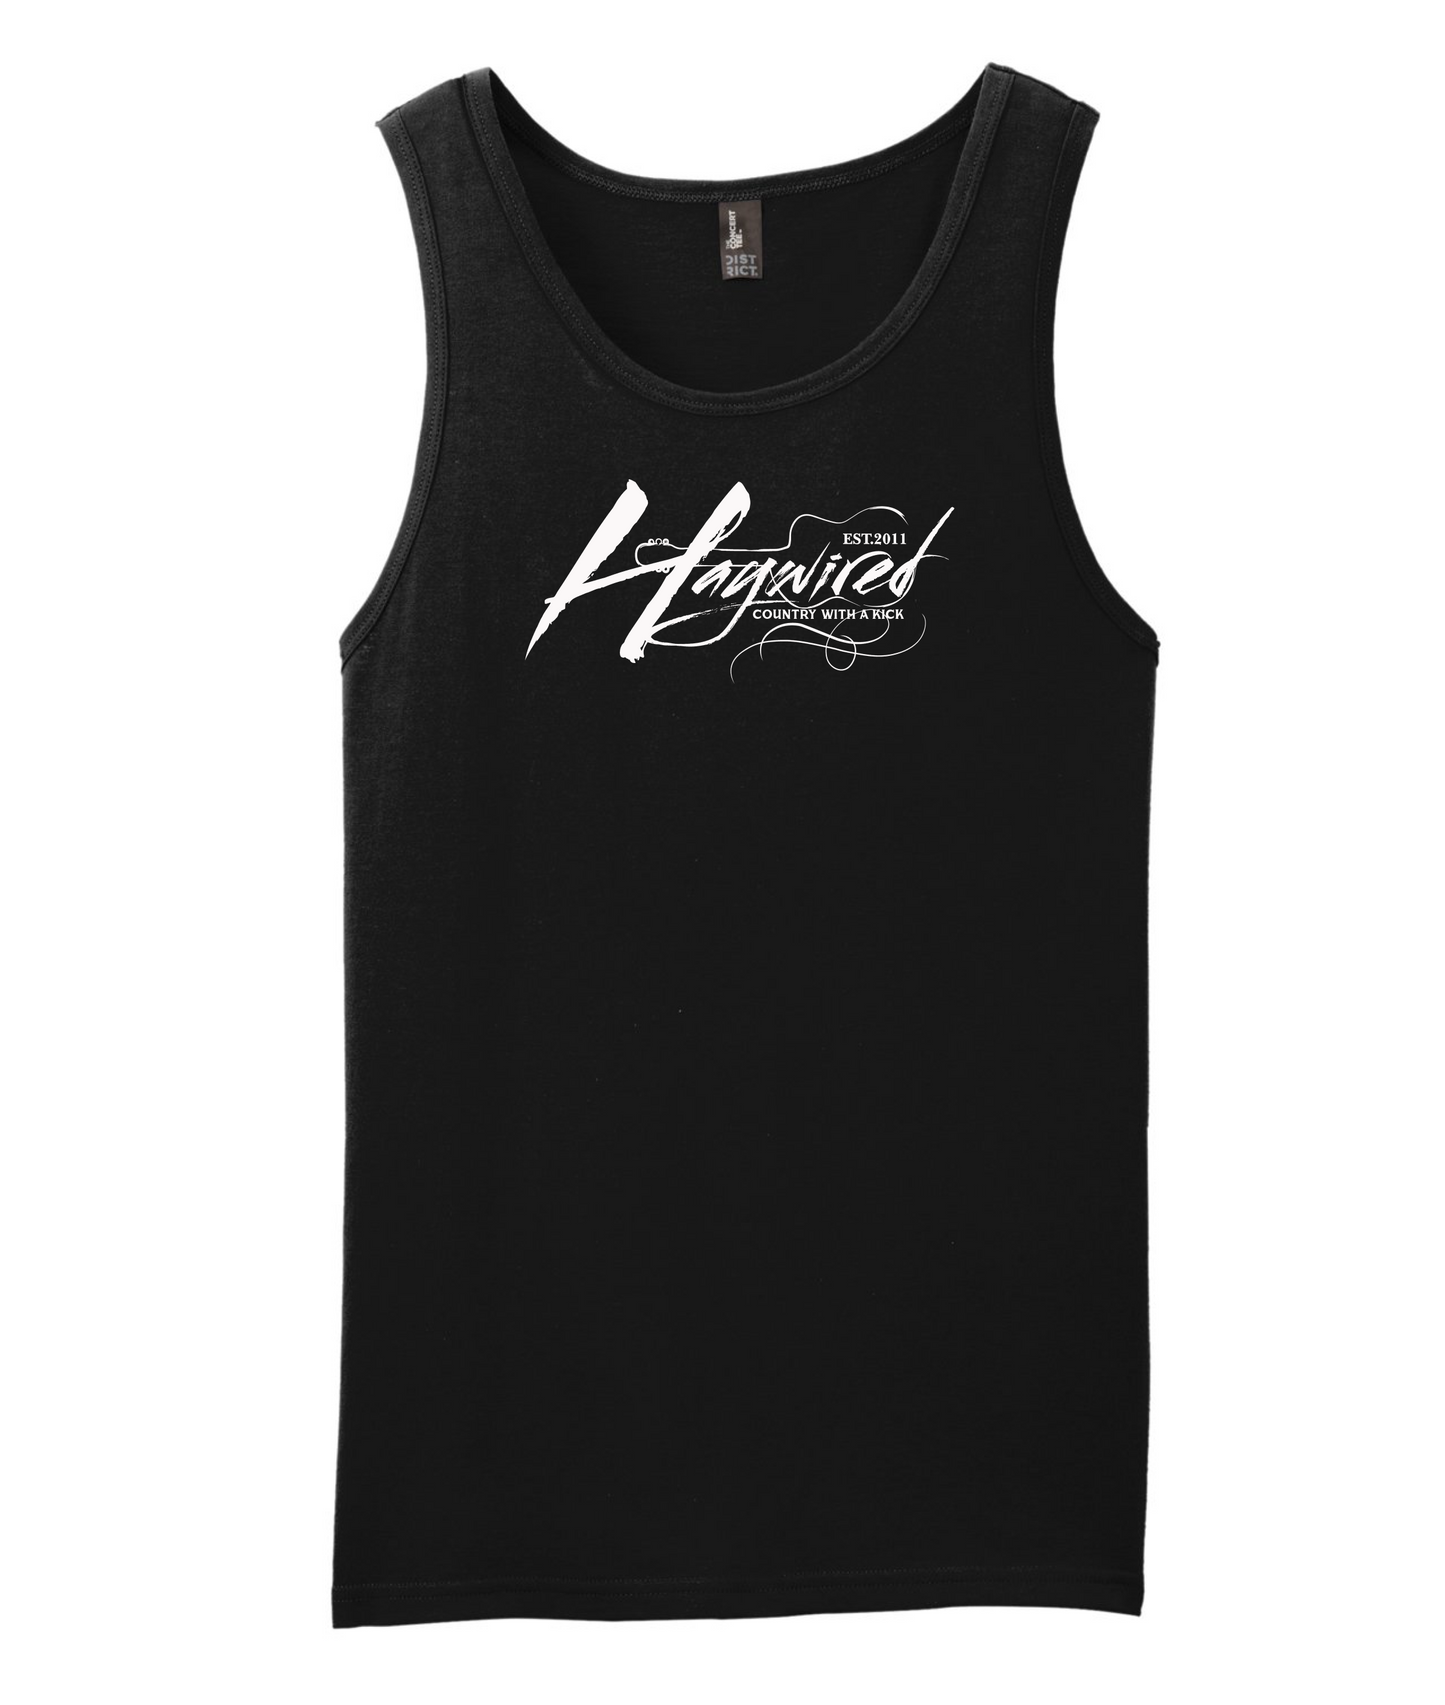 Haywired - Country With a Kick Logo - Black Tank Top